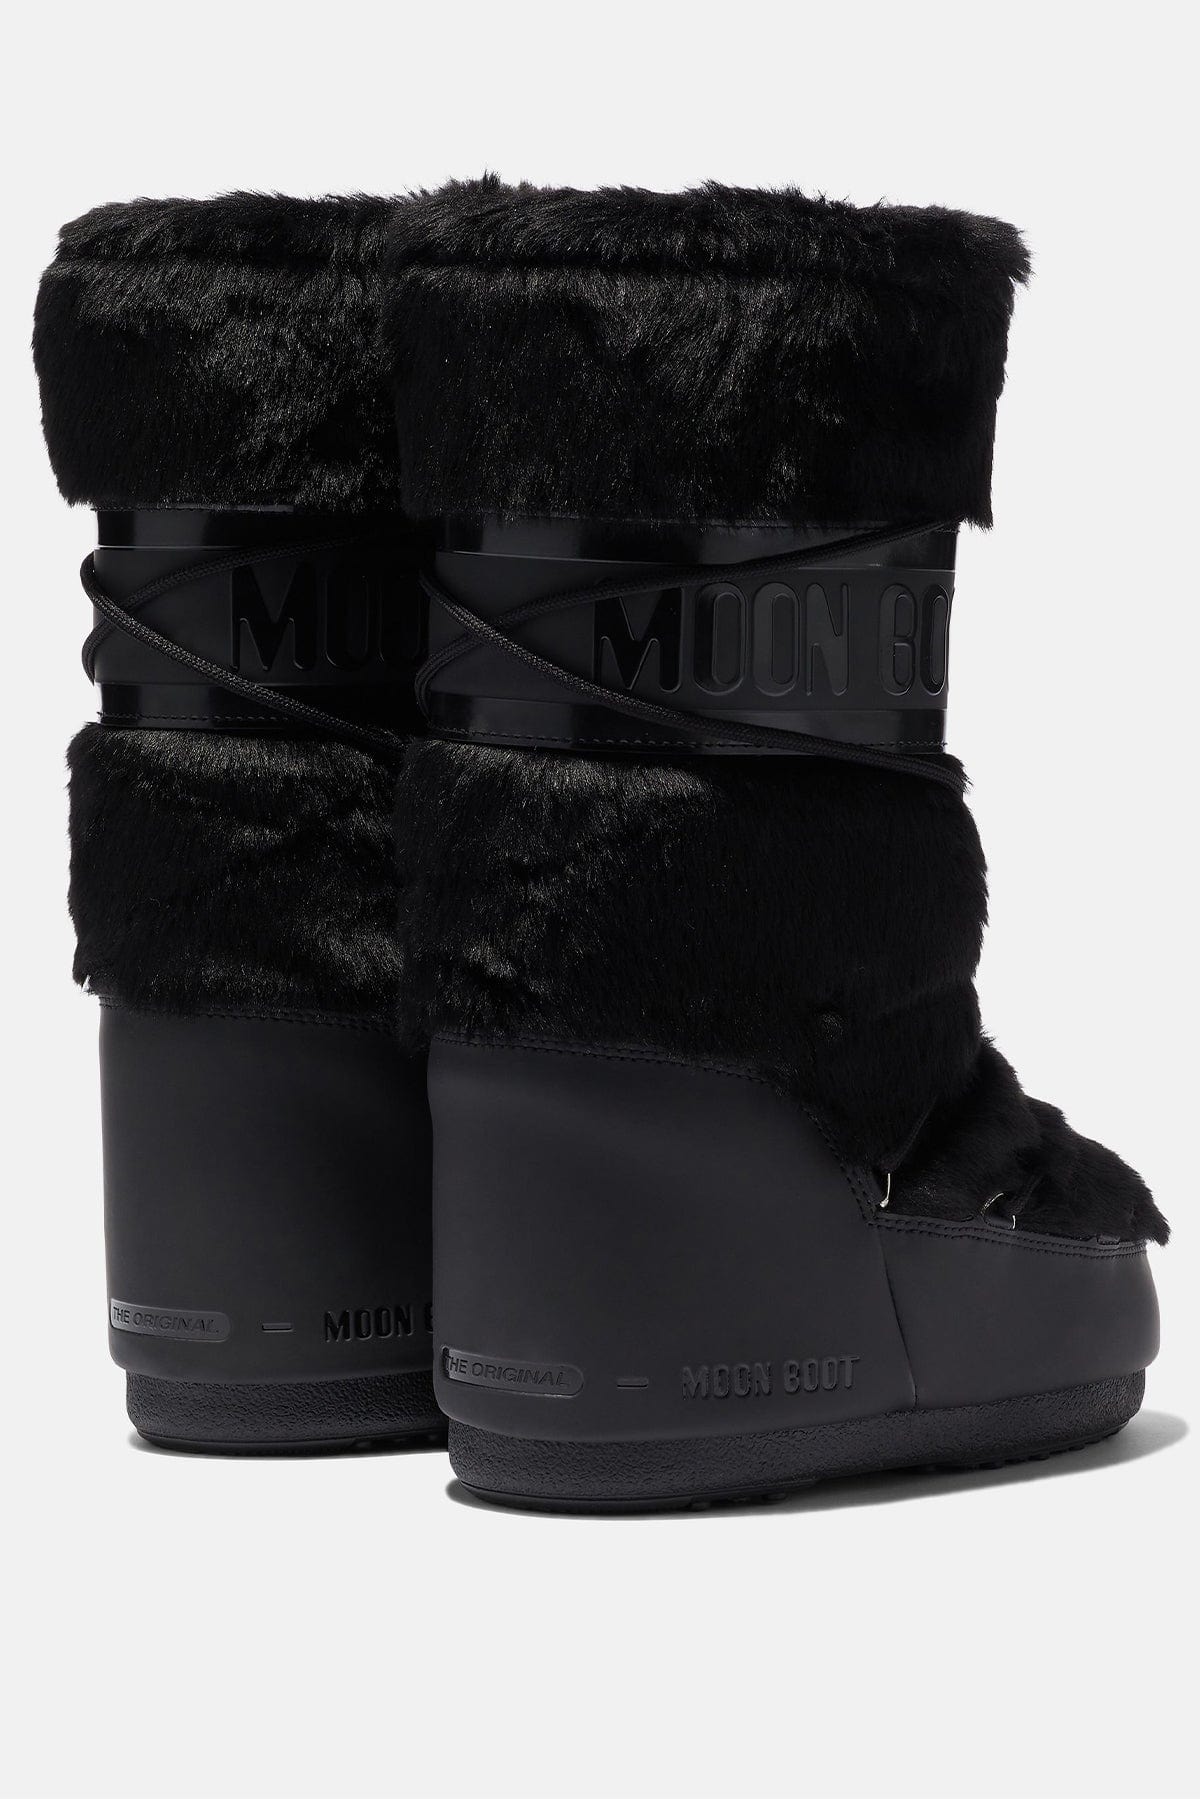 MOON BOOT CALZATURE  Moon Boot Alti Donna Faux Fur